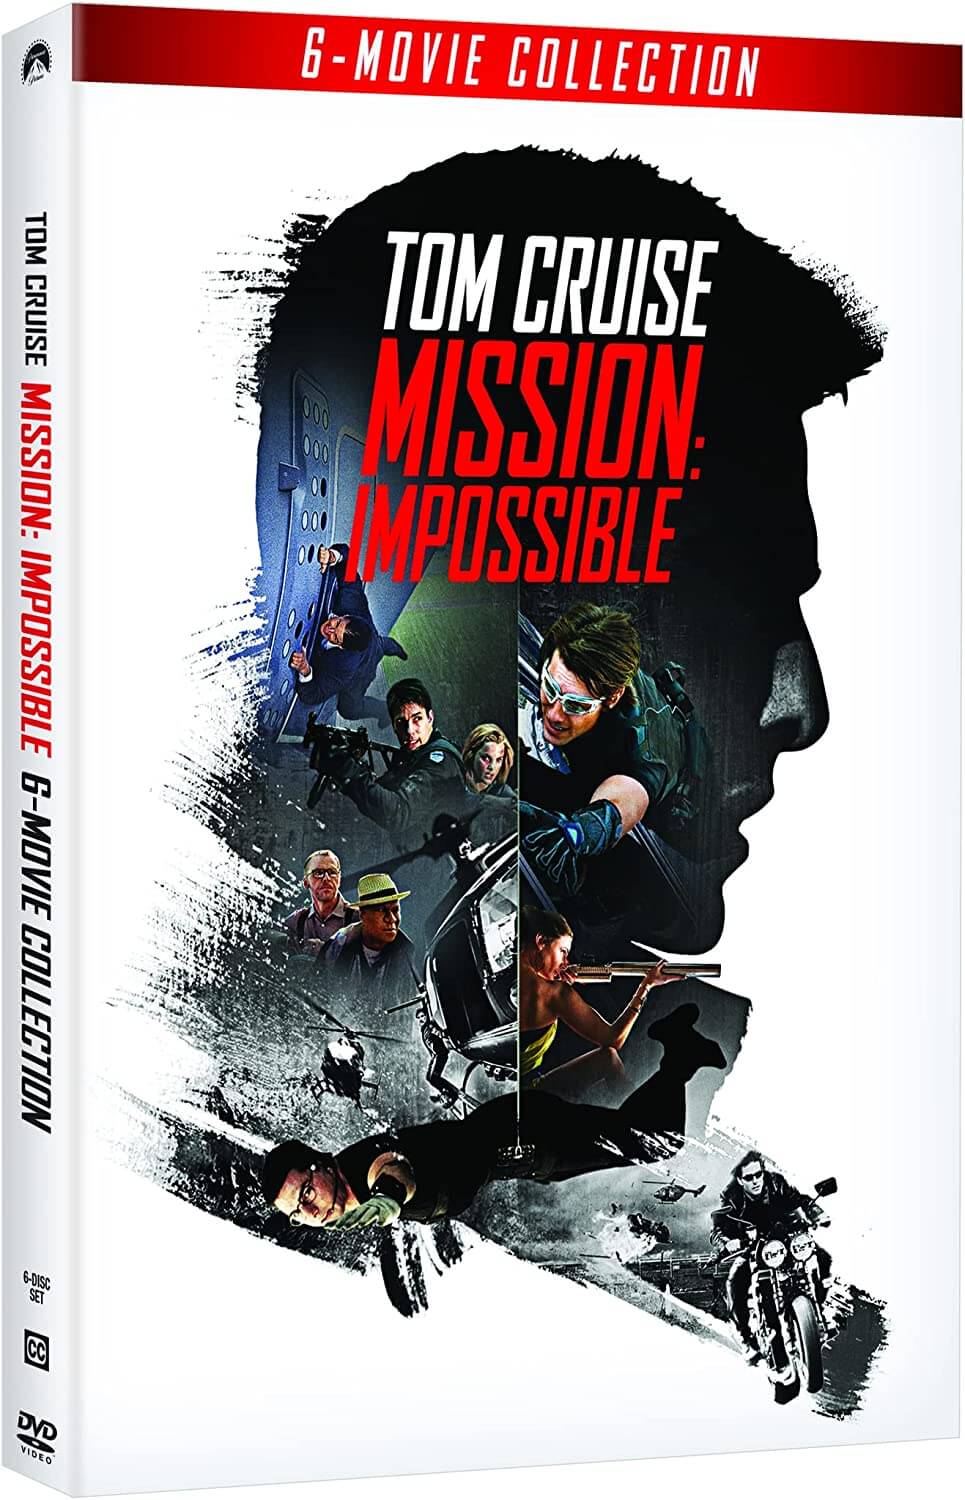 "Mission: Impossible" Six-Movie Collection